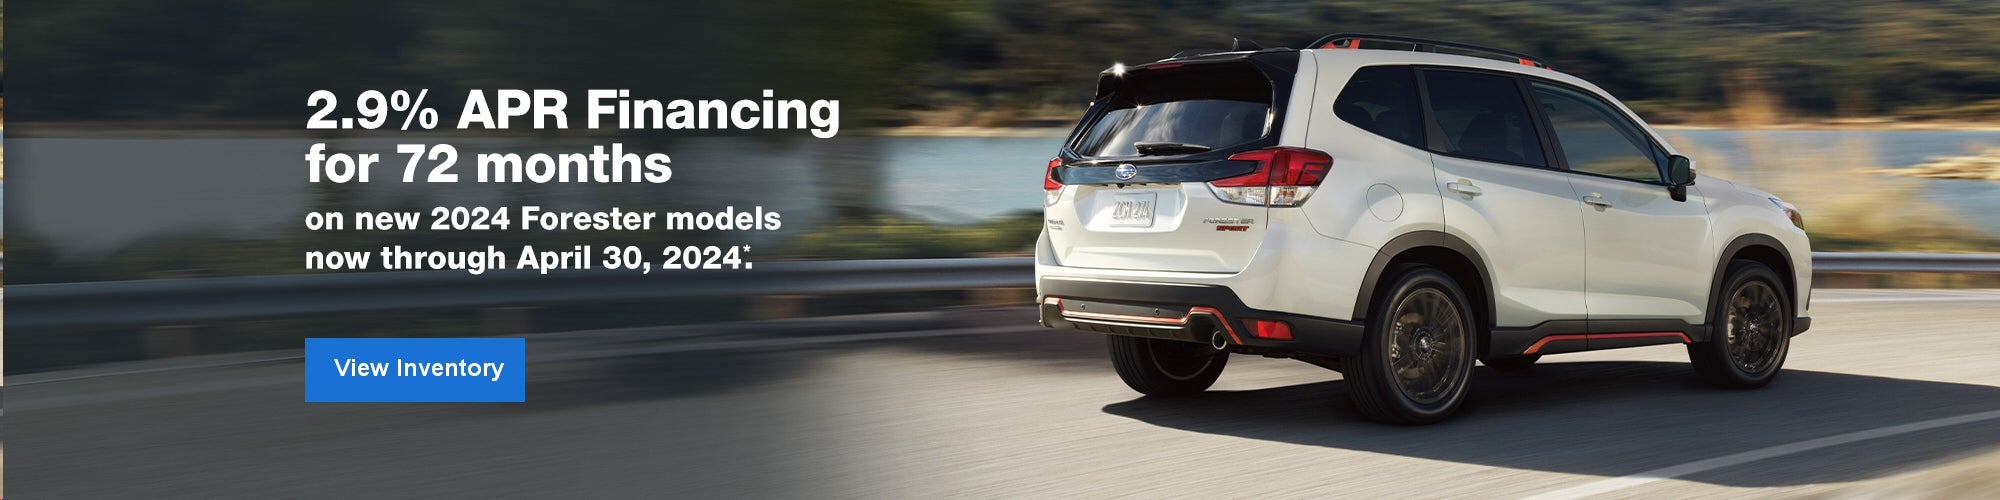 2.9% APR Financing for 72 mos. on a new 2024 Forester